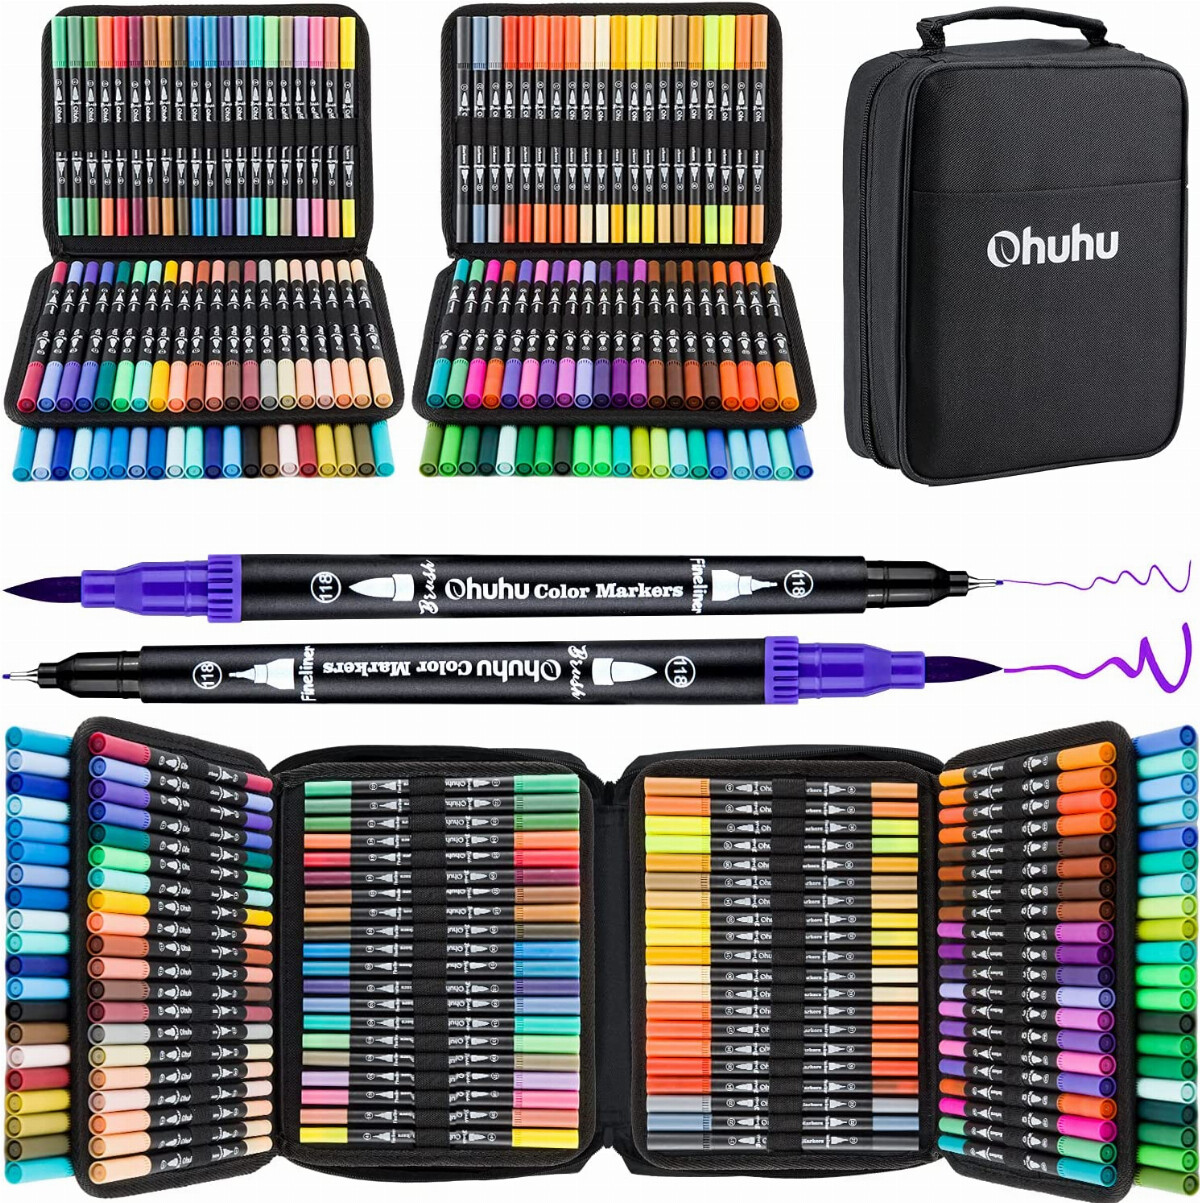 Ohuhu Water Based Brush Markers: Dual Tips - 160 Colors Art Markers Set  Coloring Brush Fineliner Color Marker Pens for Calligraphy Drawing  Sketching Coloring Bullet Journal Art Supplies - Black Black Package